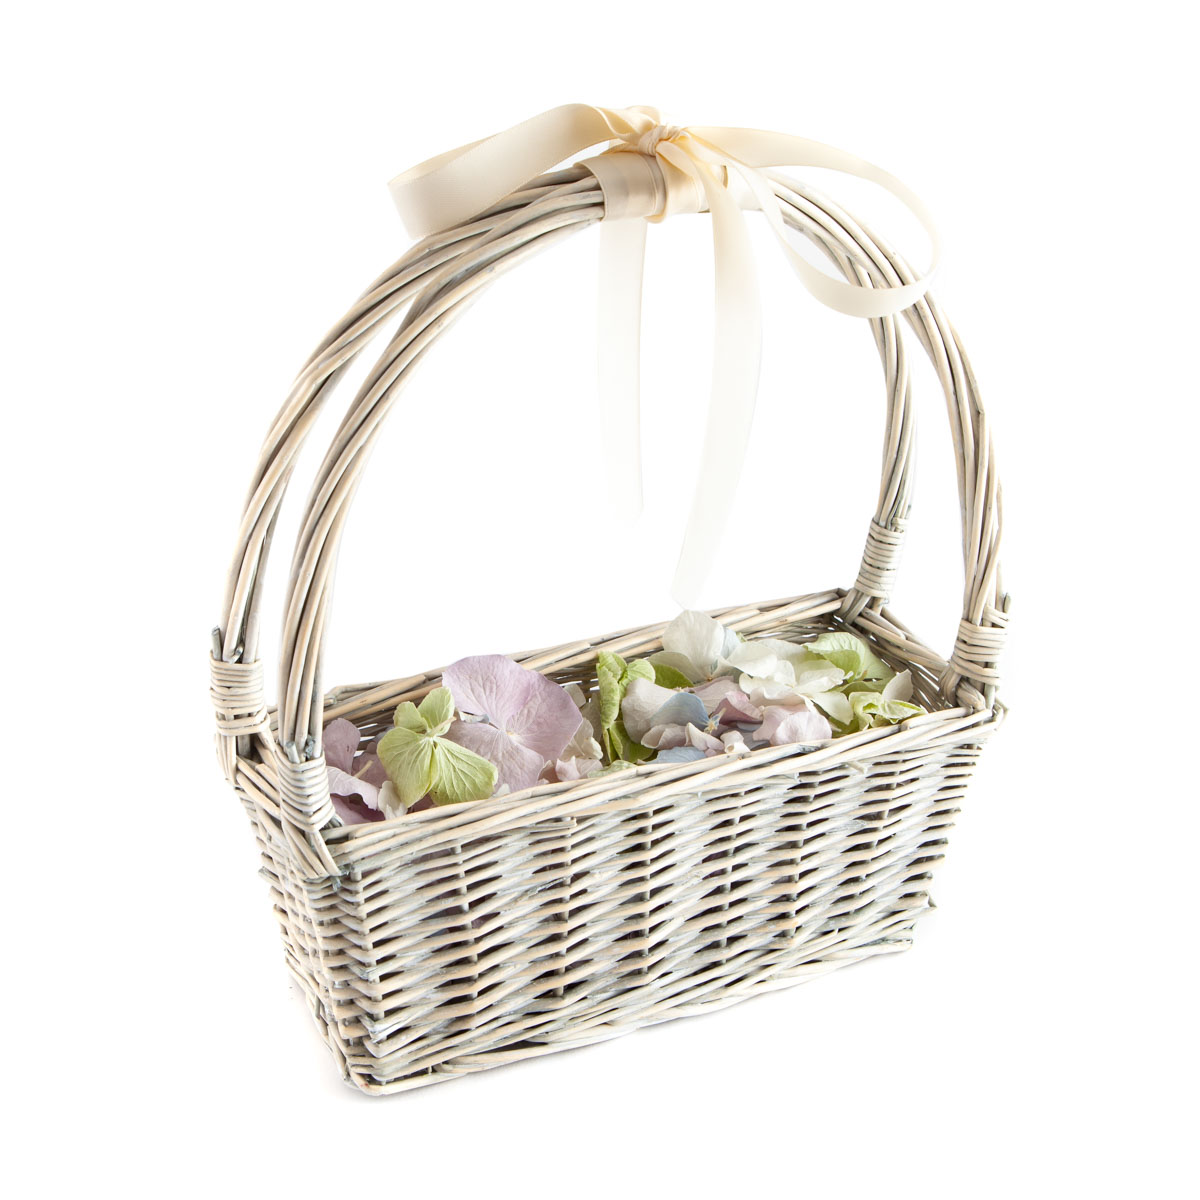 A narrow white basket of Hydrangea Petal Confetti. The petals are lilac, blue and green and the basket has a ribbon bow tied on the handle.